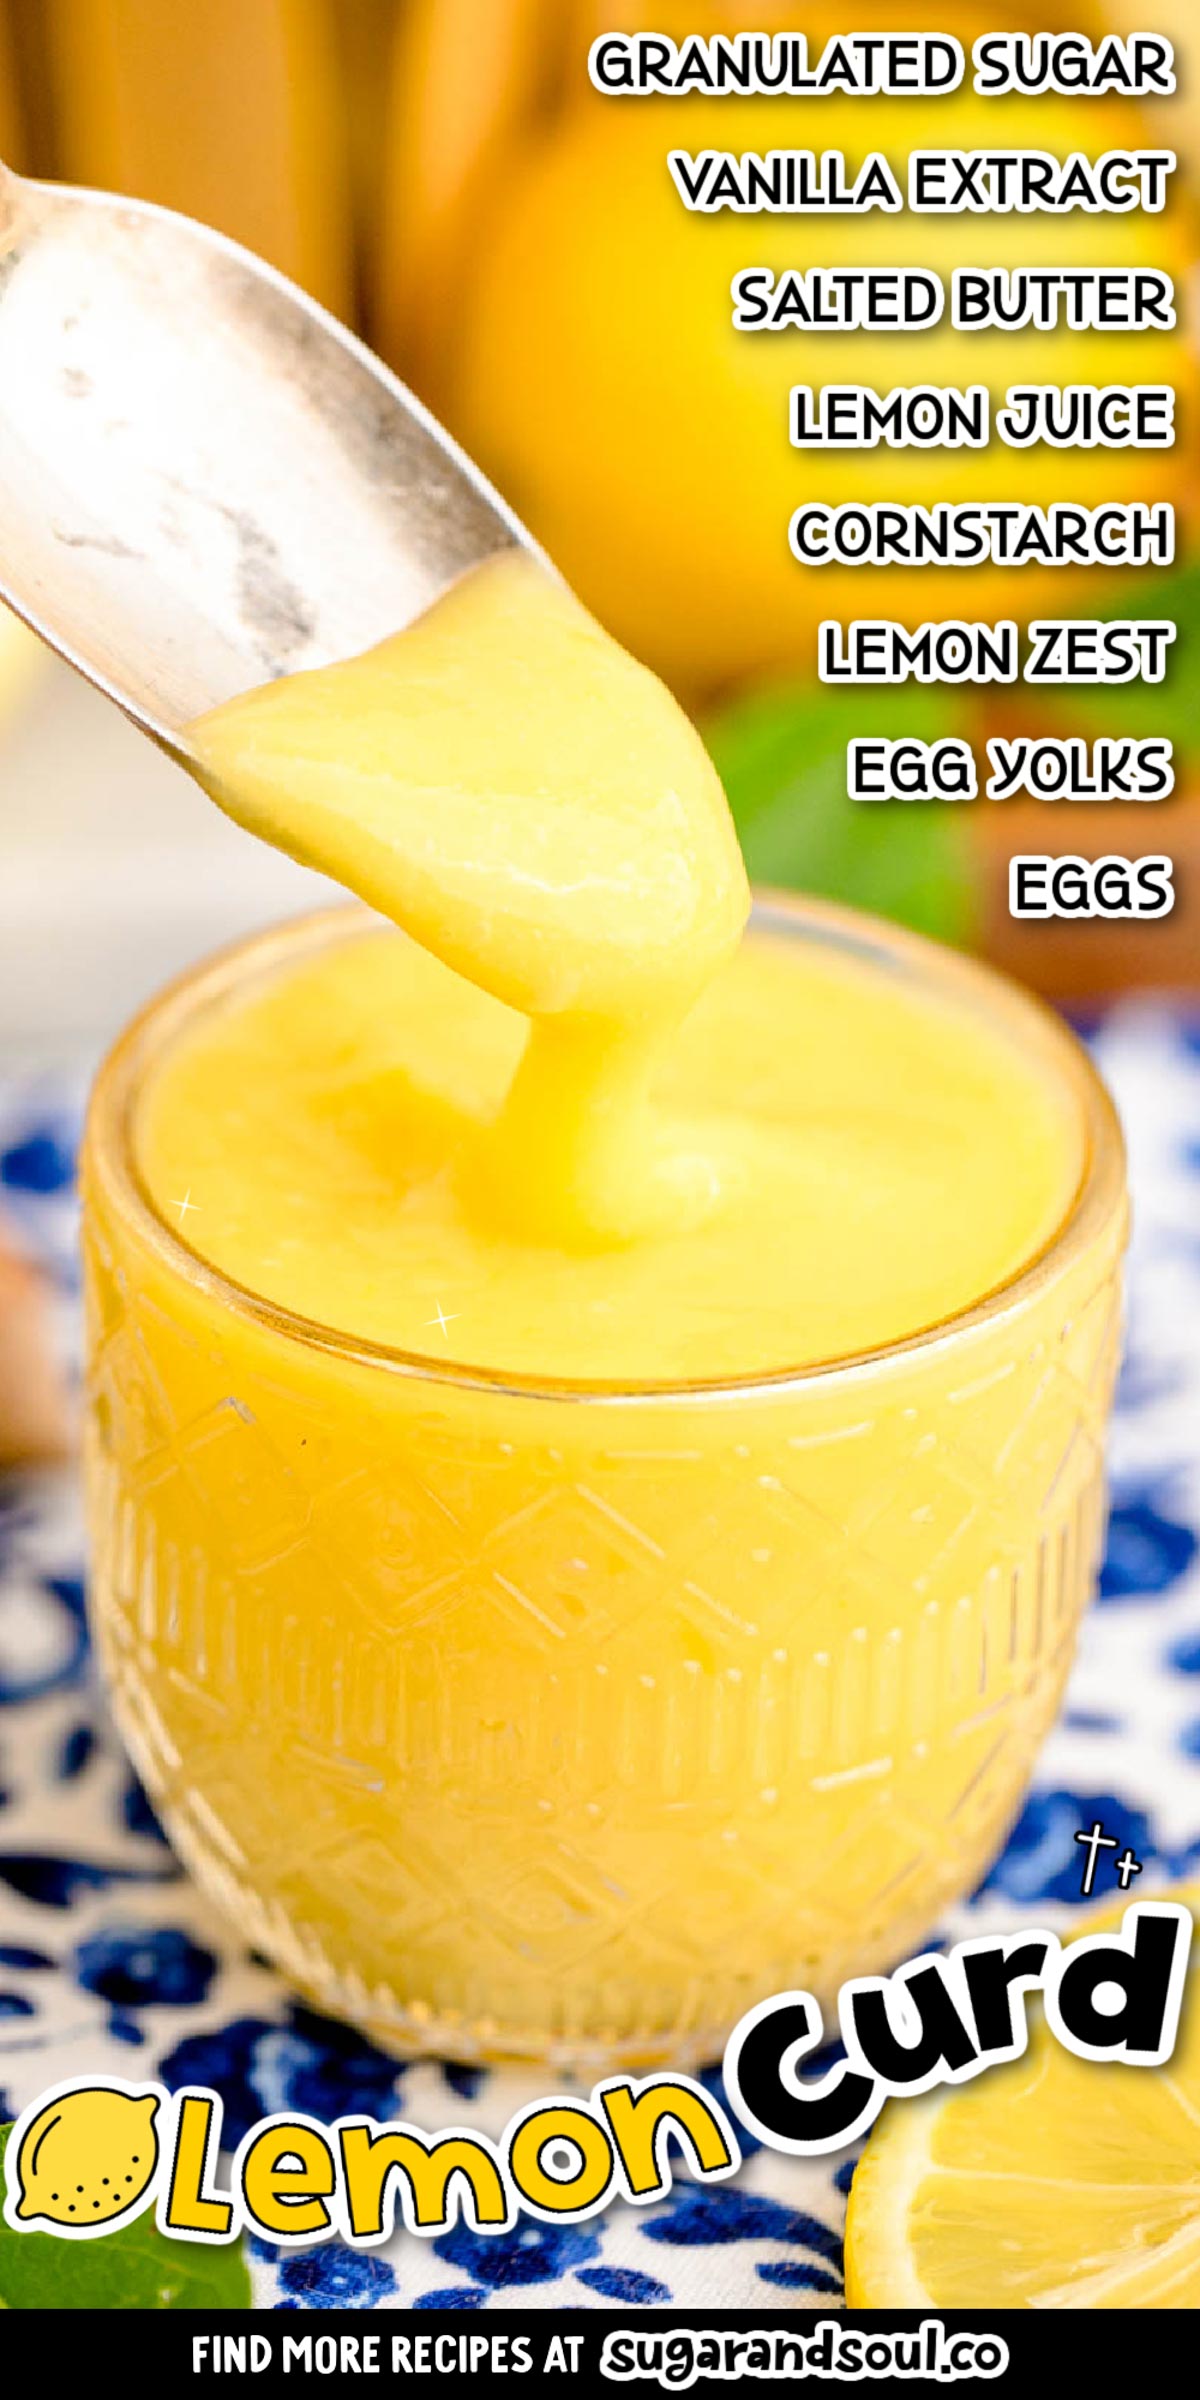 Homemade Lemon Curd uses freshly squeezed lemon juice and lemon zest to create a perfectly tart curd that's a great addition to any recipe! Cooks up in just 30 minutes! via @sugarandsoulco